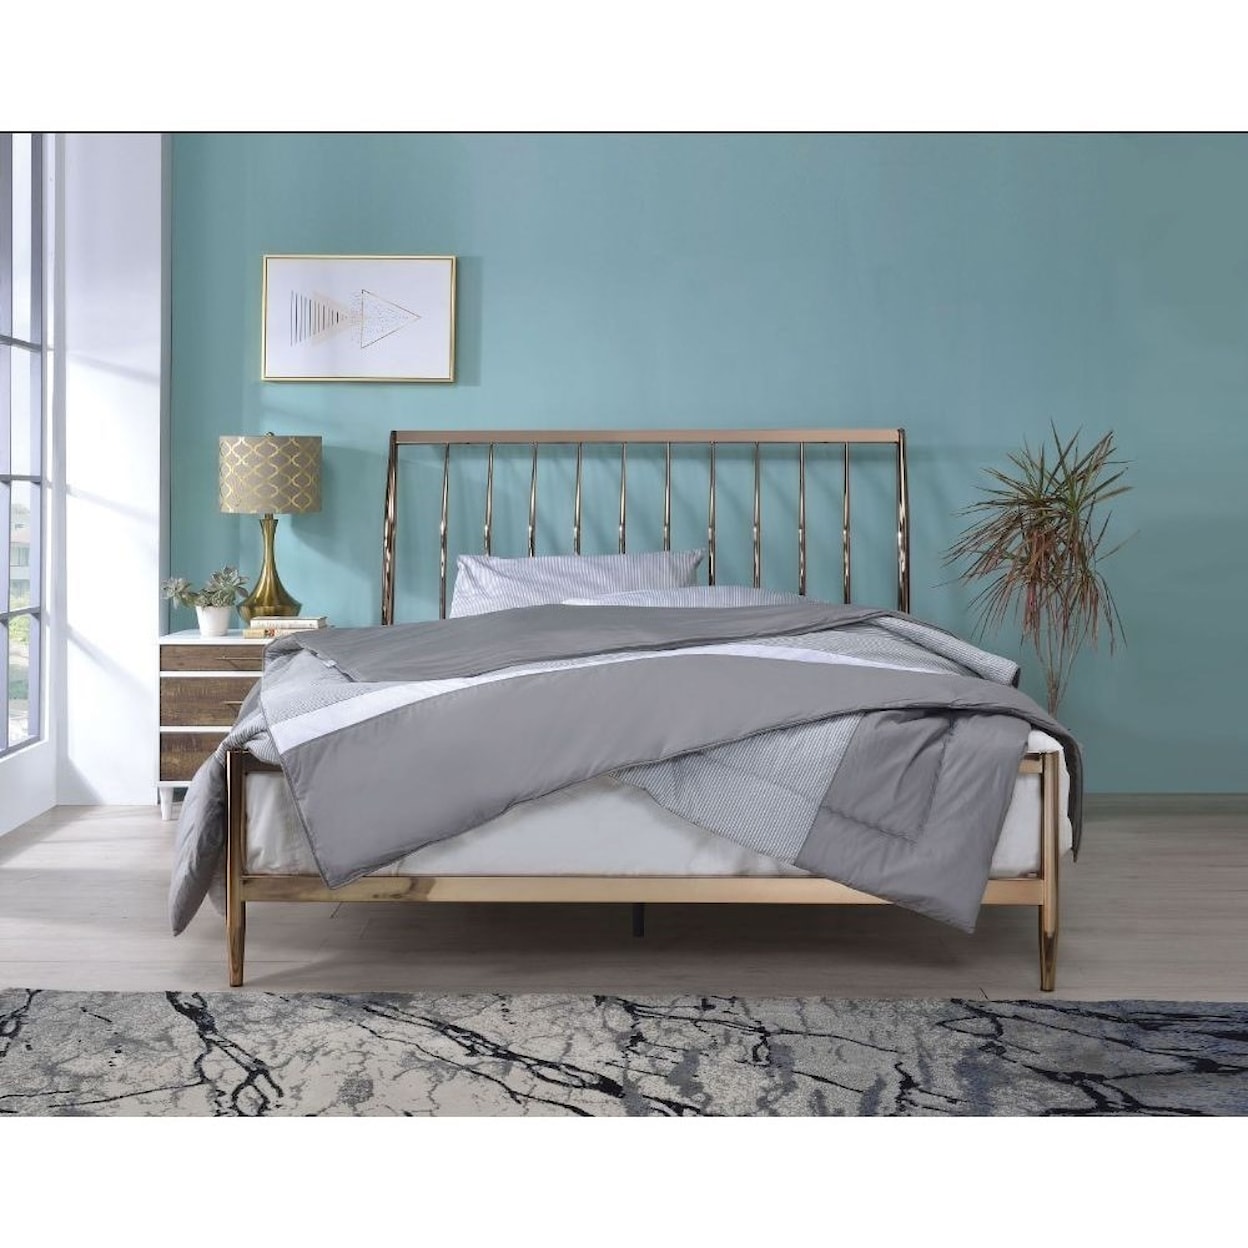 Acme Furniture Marianne Queen Bed